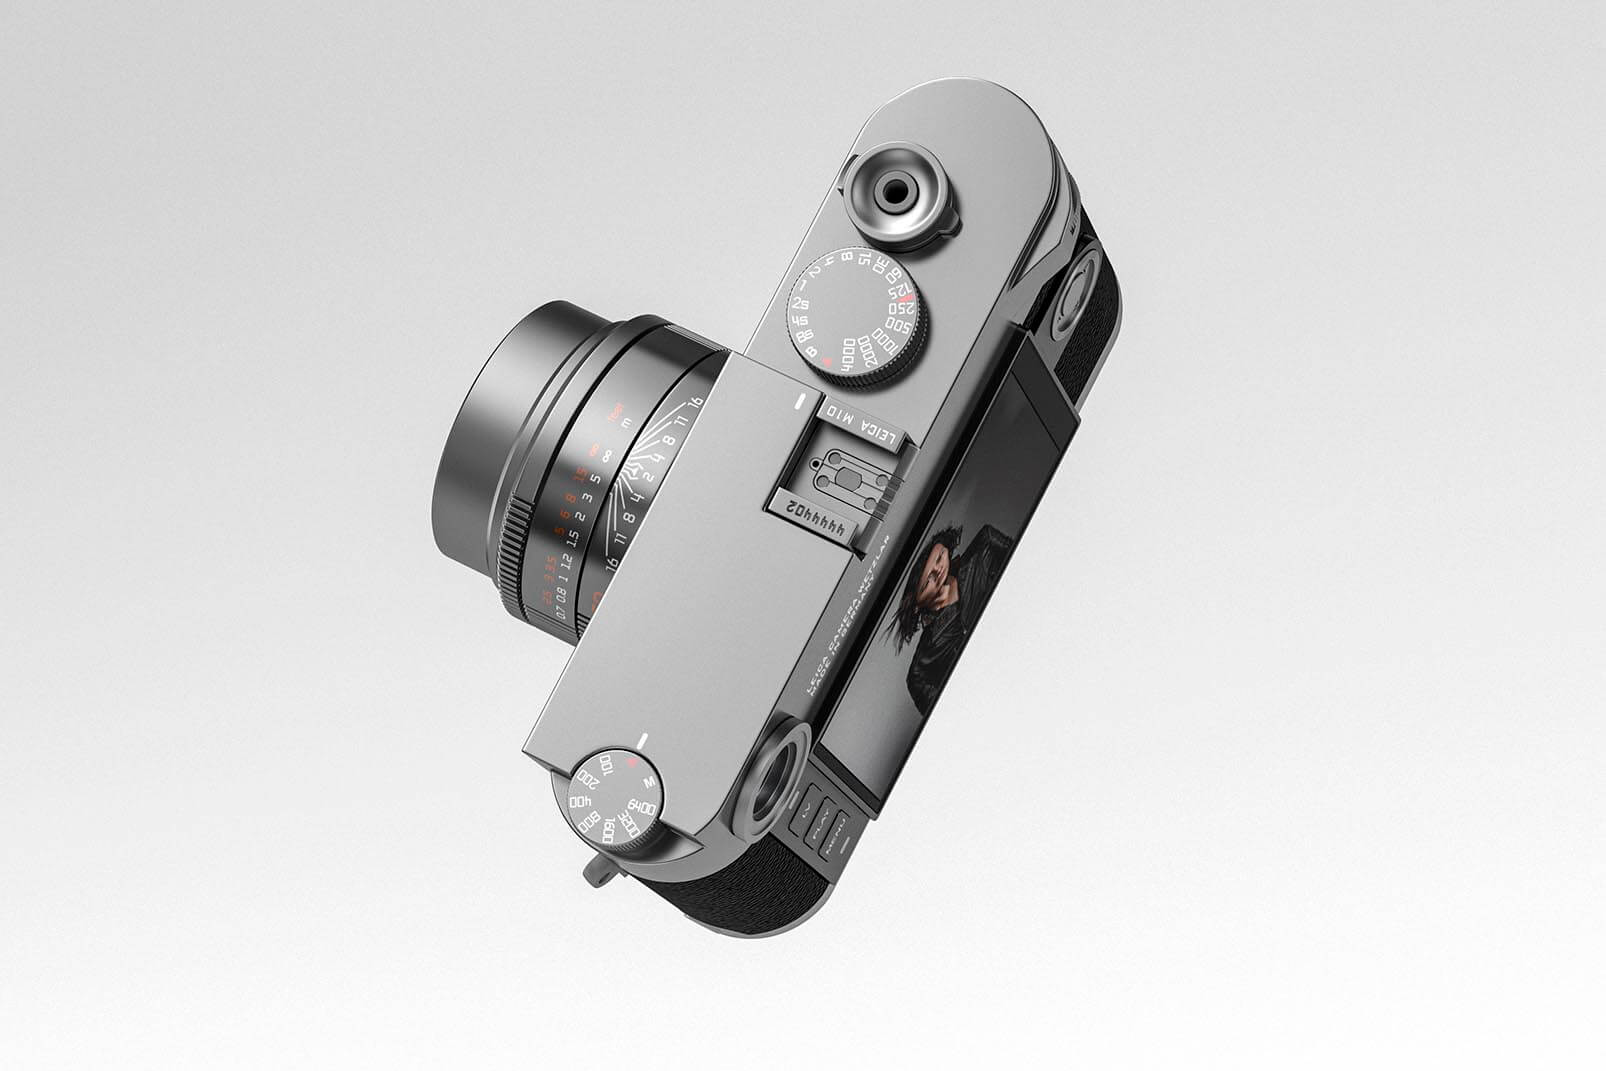 CGI Visualization of Leica M10 Camera CGI by Studio Powers - An independent CGI Studio Based in Singapore Specializing In Product Visualization.